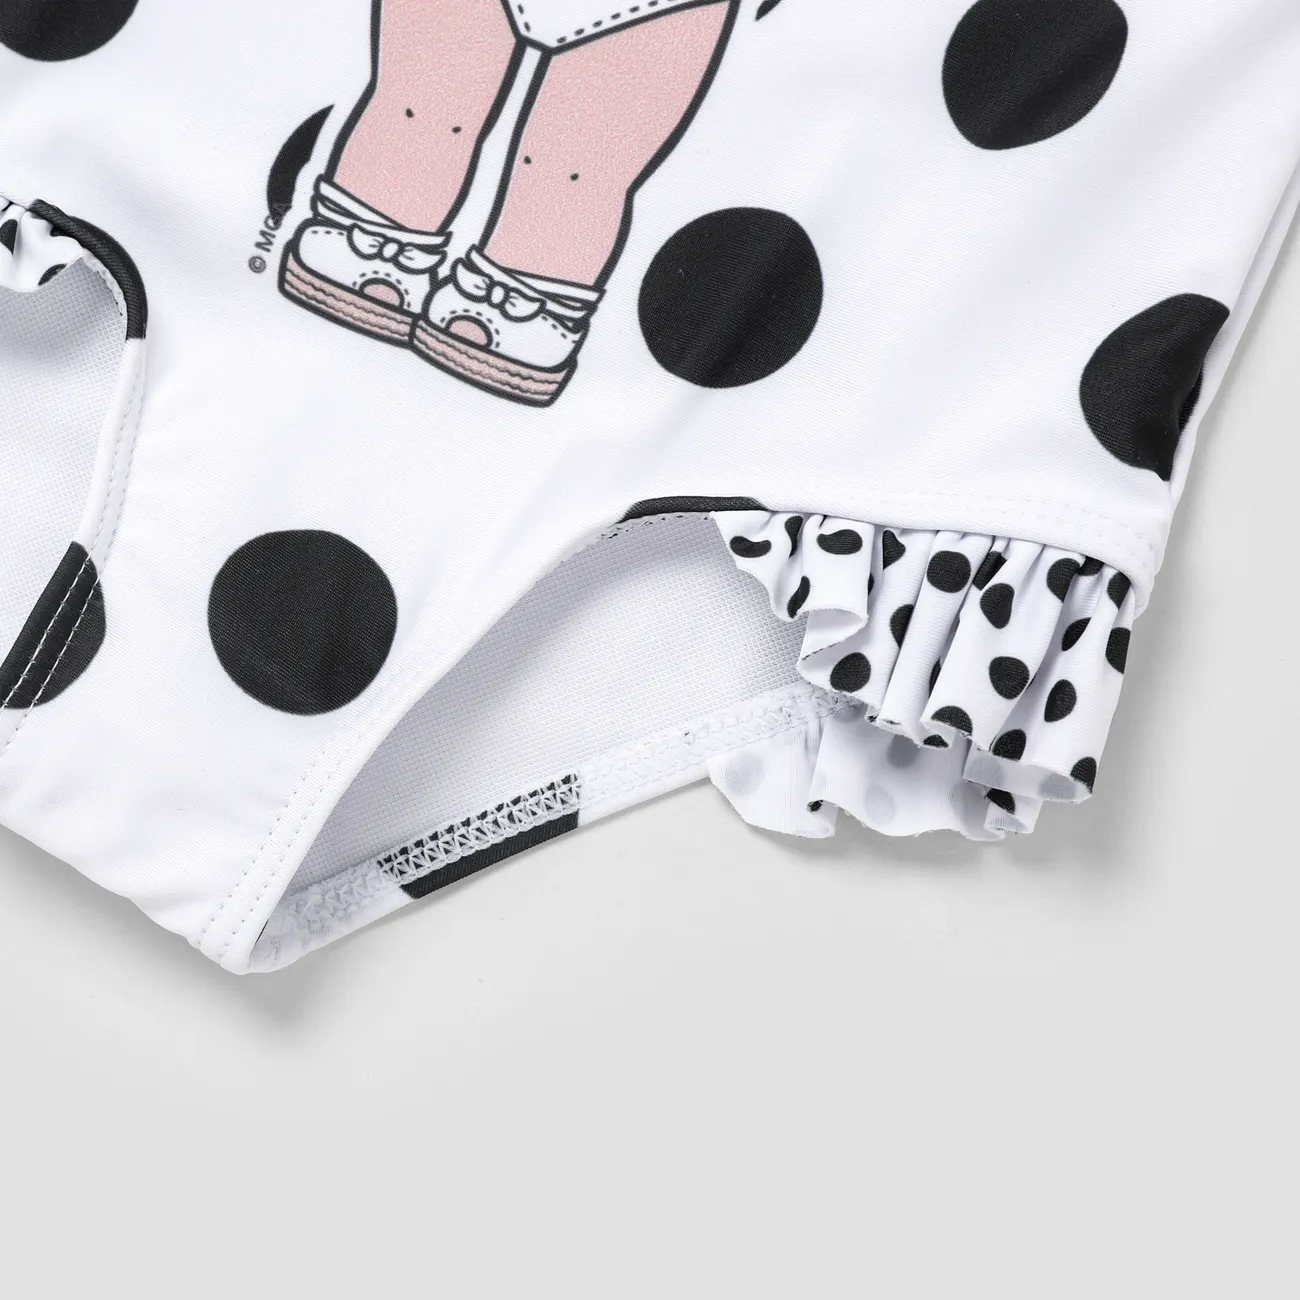 L.O.L. SURPRISE! Kid Girl Graphic Print Puff Sleeve One Shoulder Swimsuit White big image 1